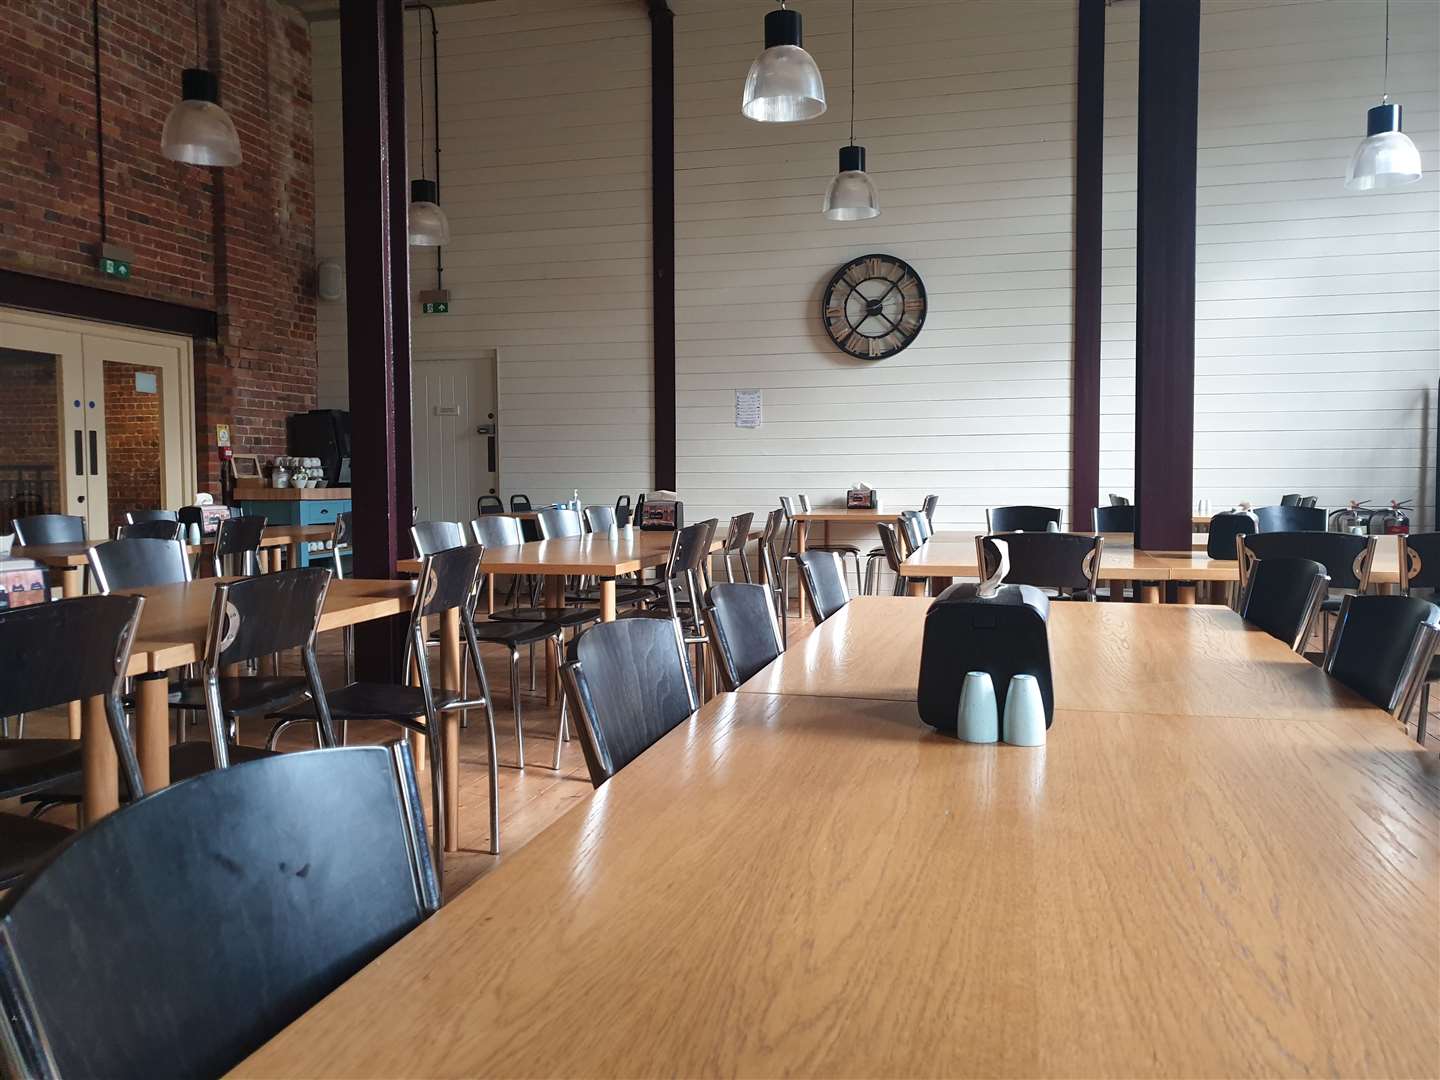 The Malthouse also has an 80-seat dining hall